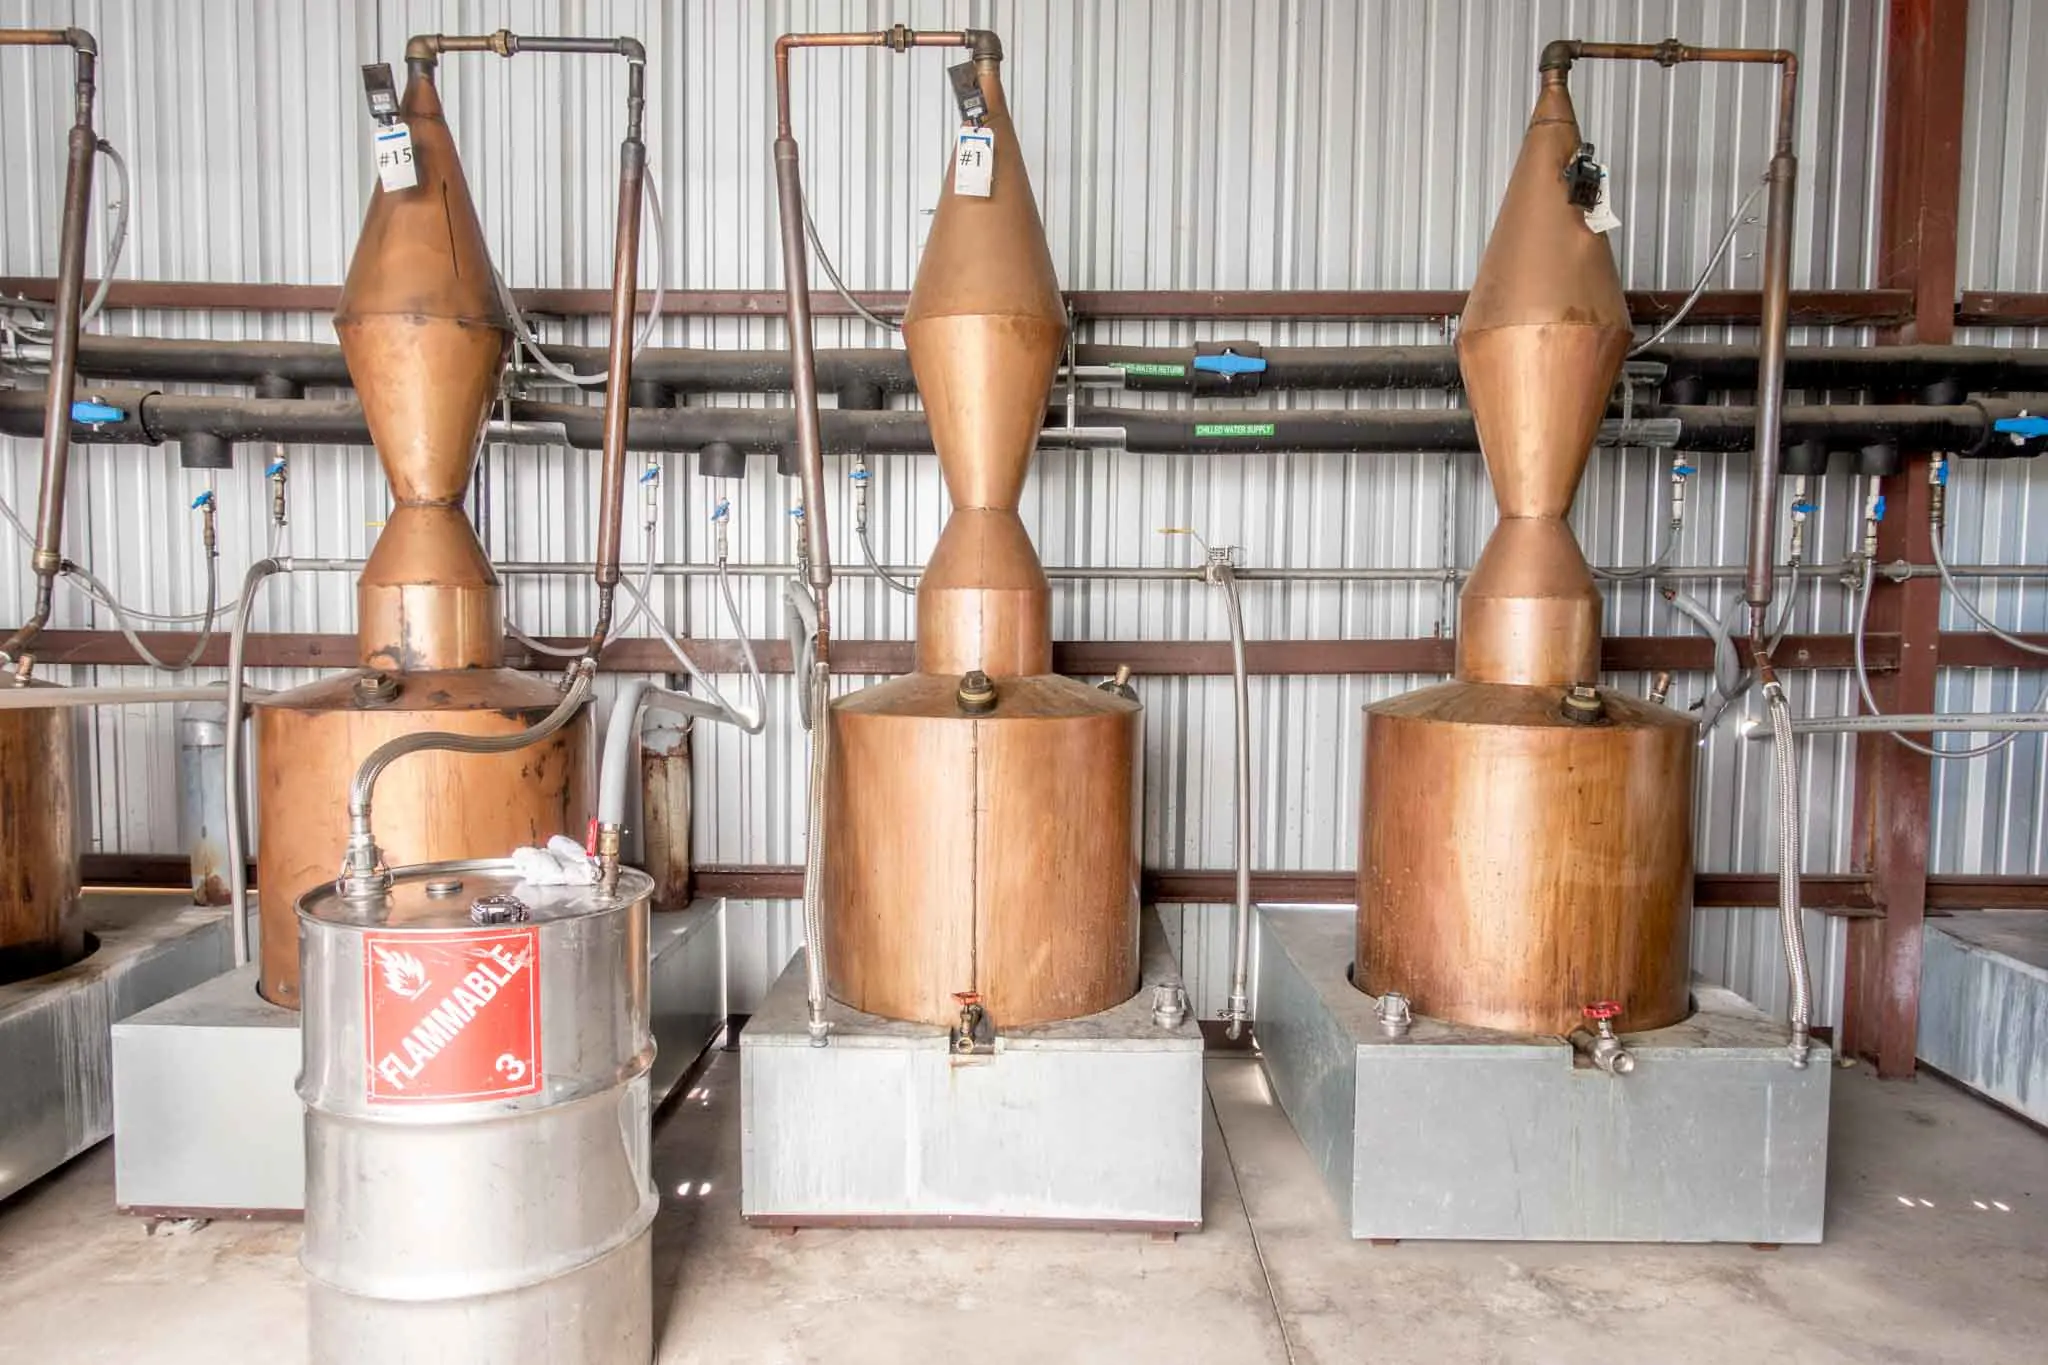 Dripping Springs Texas vodka and gin are made in small copper stills